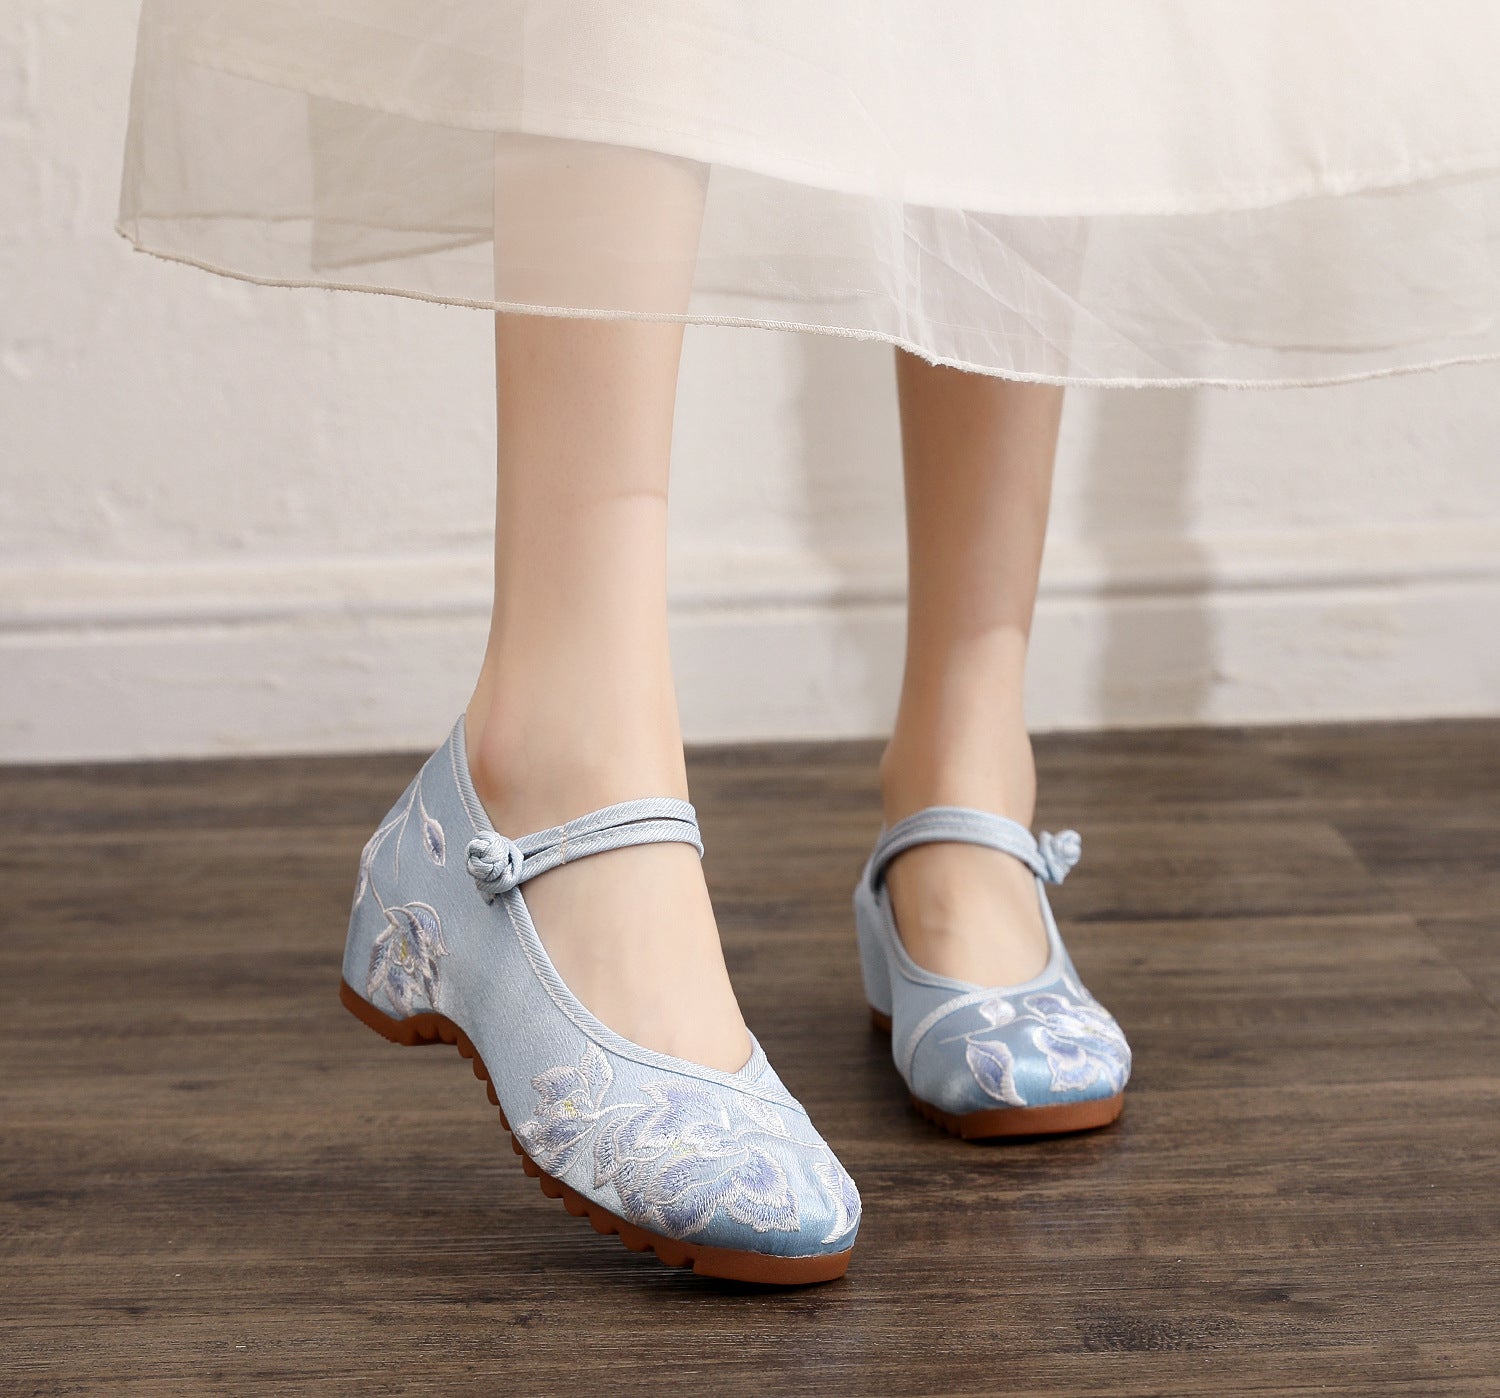 Women's Toe Invisible Elevated Cheongsam Antique Embroidered Canvas Shoes